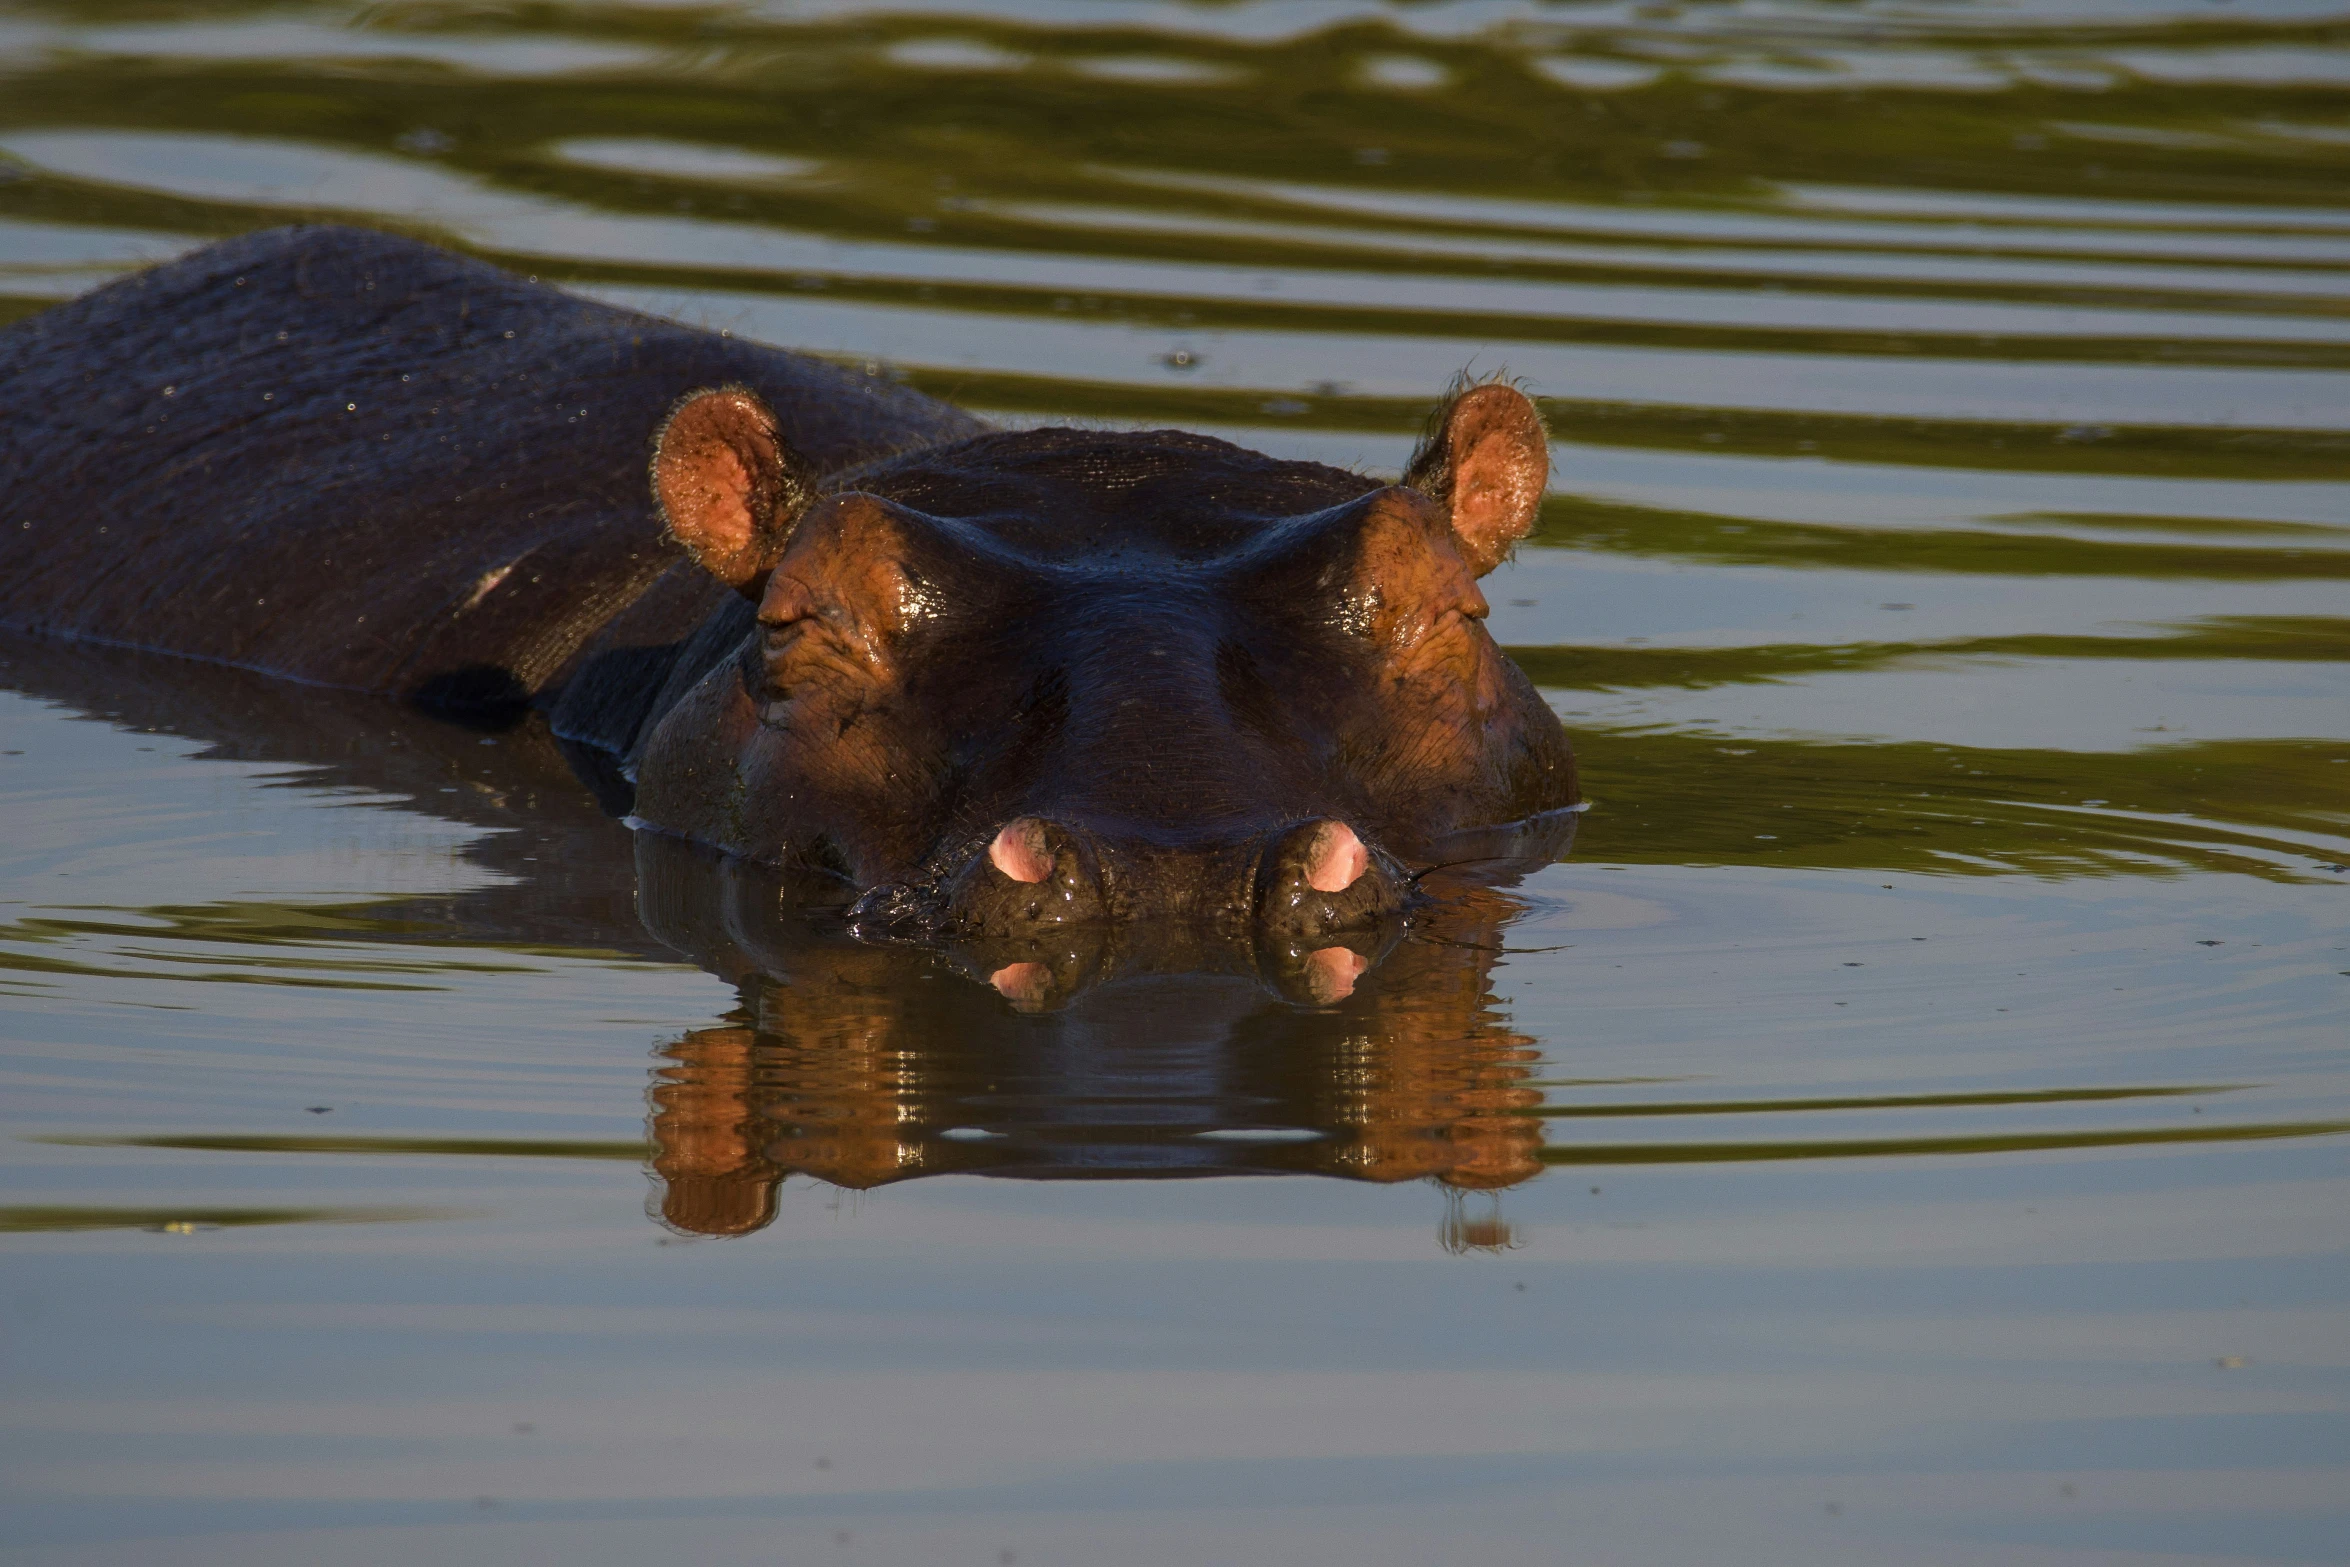 the hippo is swimming in the water with its head out